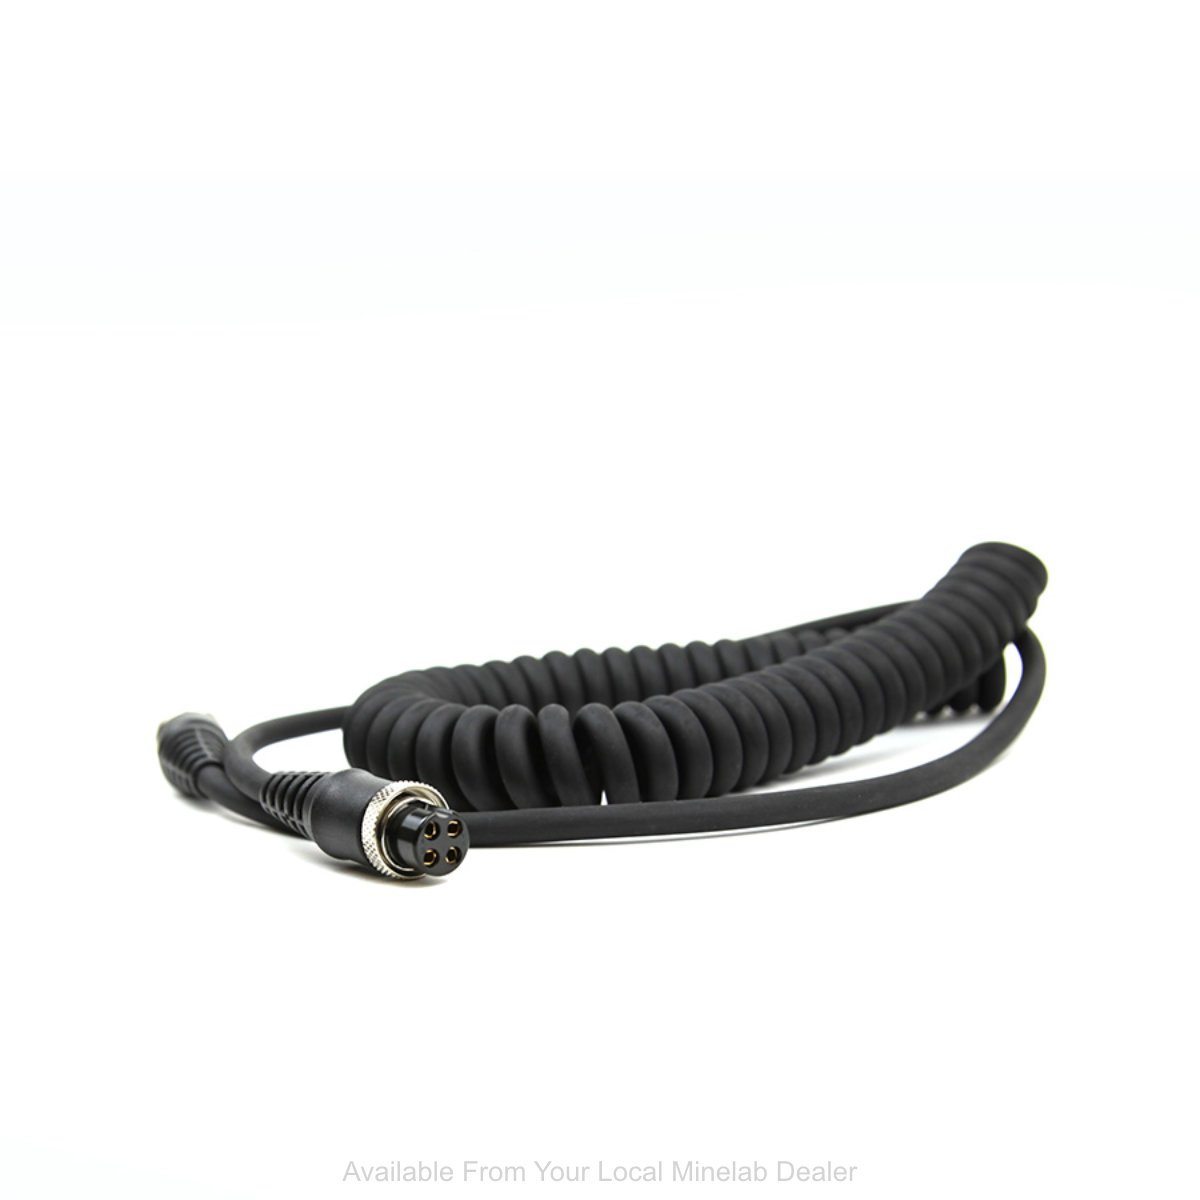 Minelab Battery Cable, SD/GP